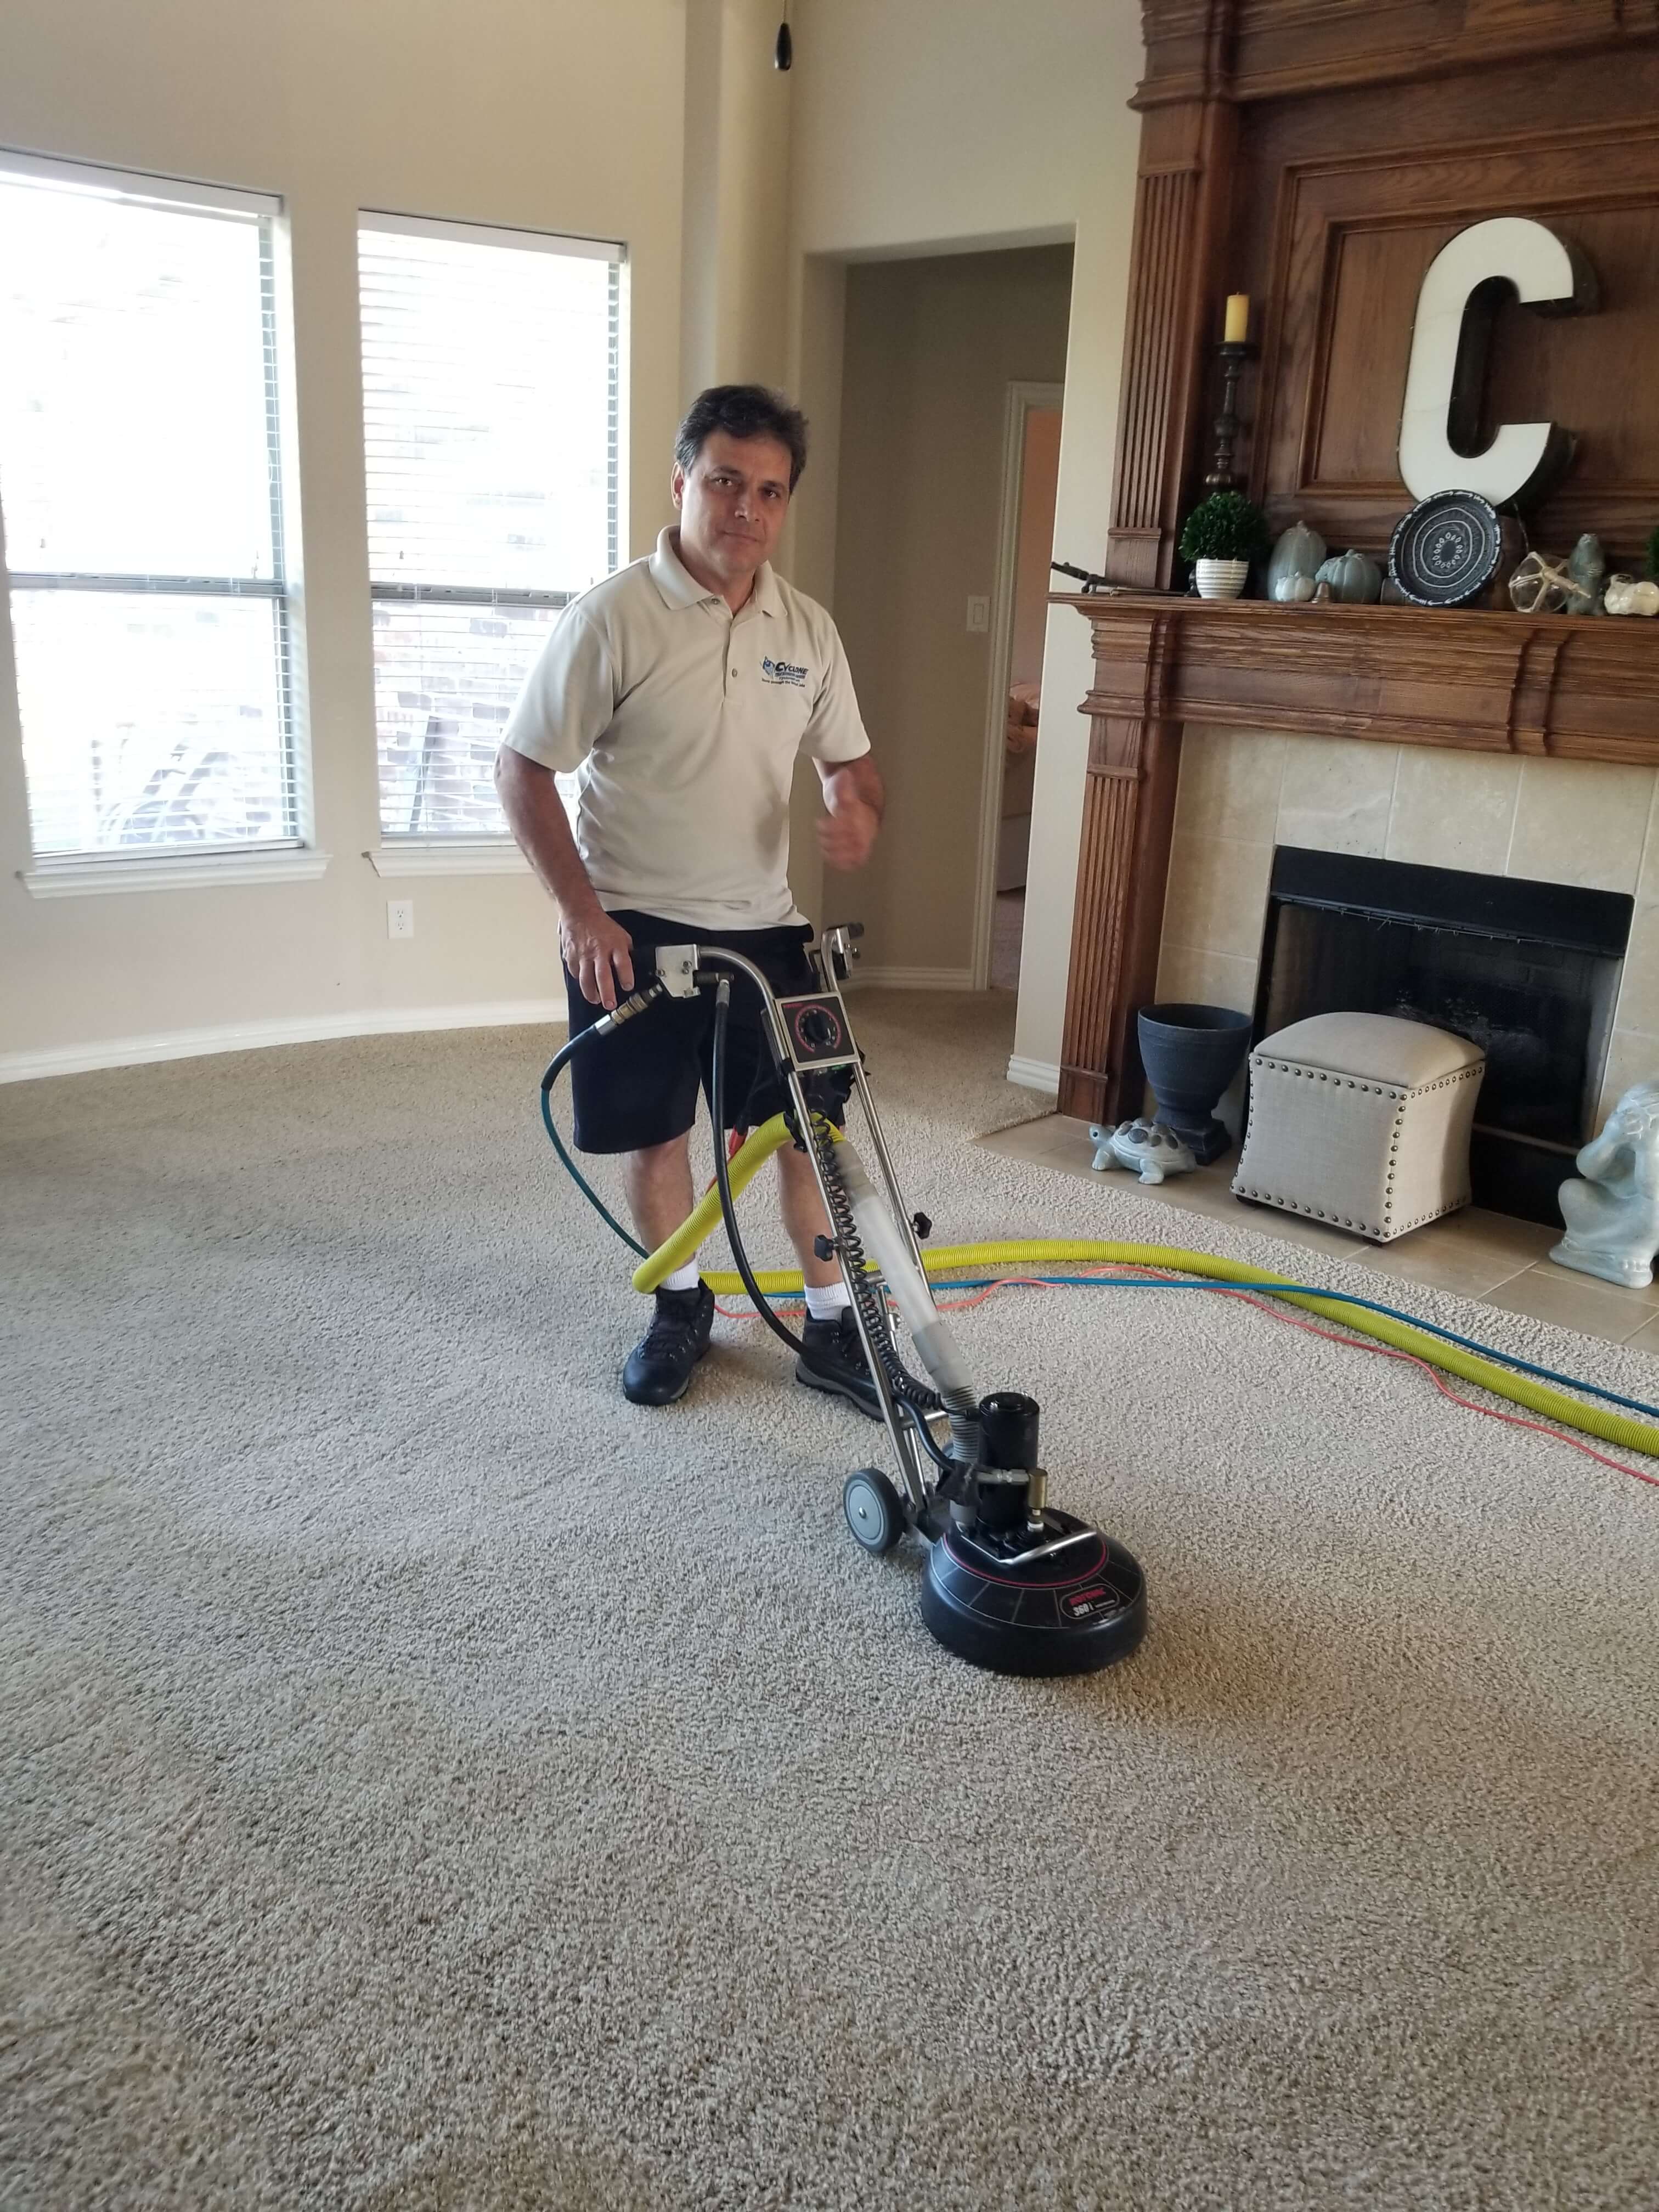 Rotovac carpet cleaning in McKinney Texas on 8/15/2020